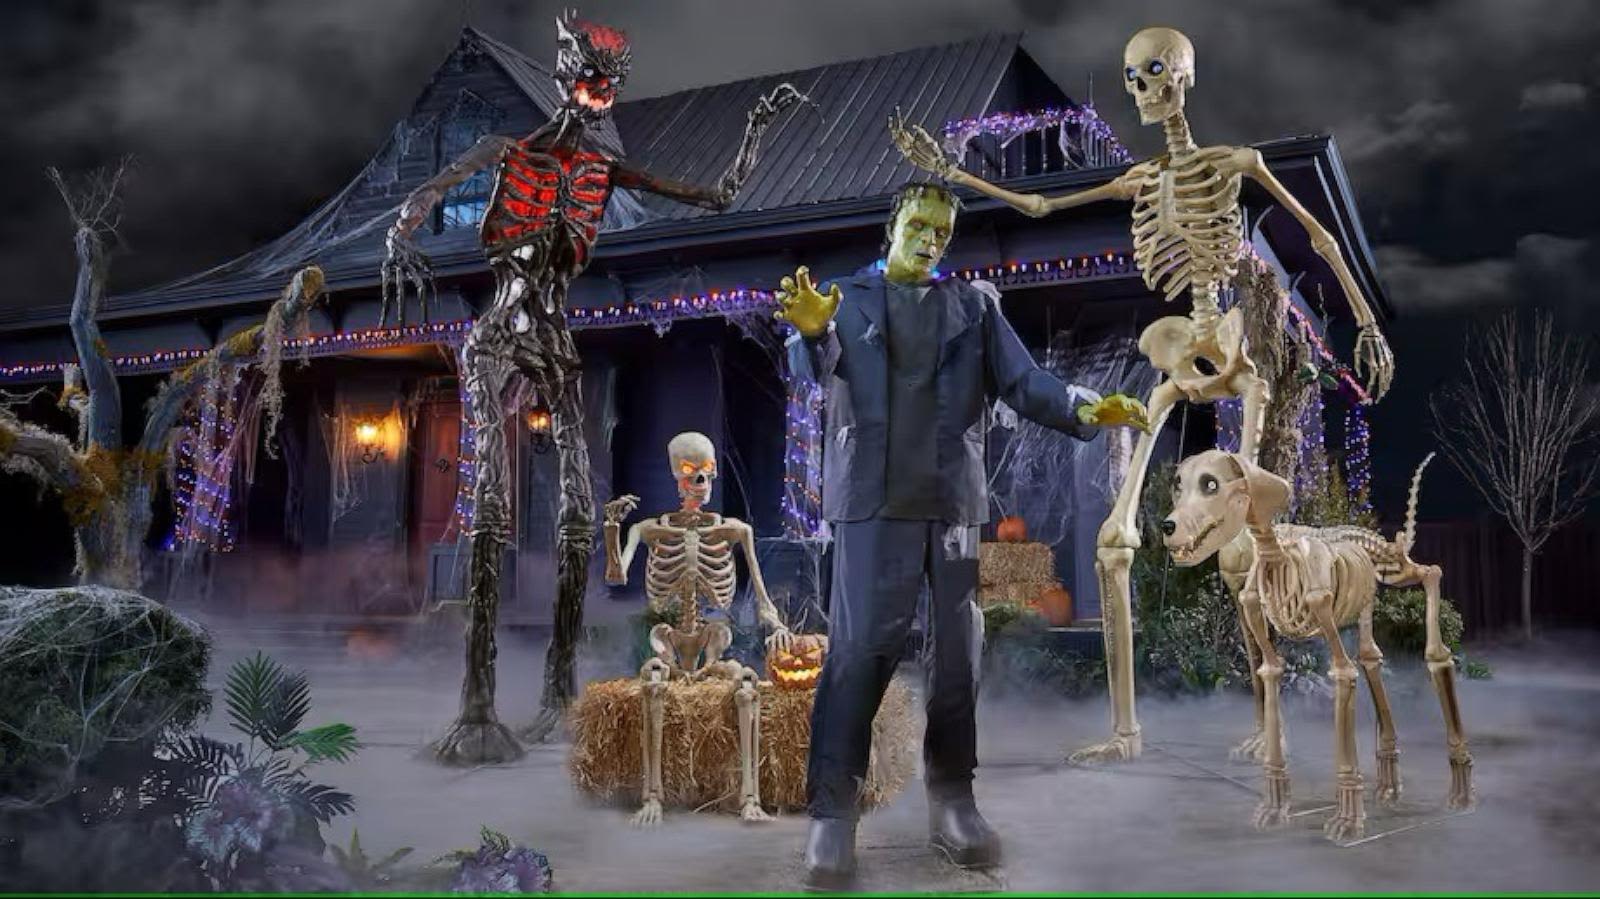 Home Depot's official Halloween launch is here! Shop giant skeletons, the new Skelly dog and more